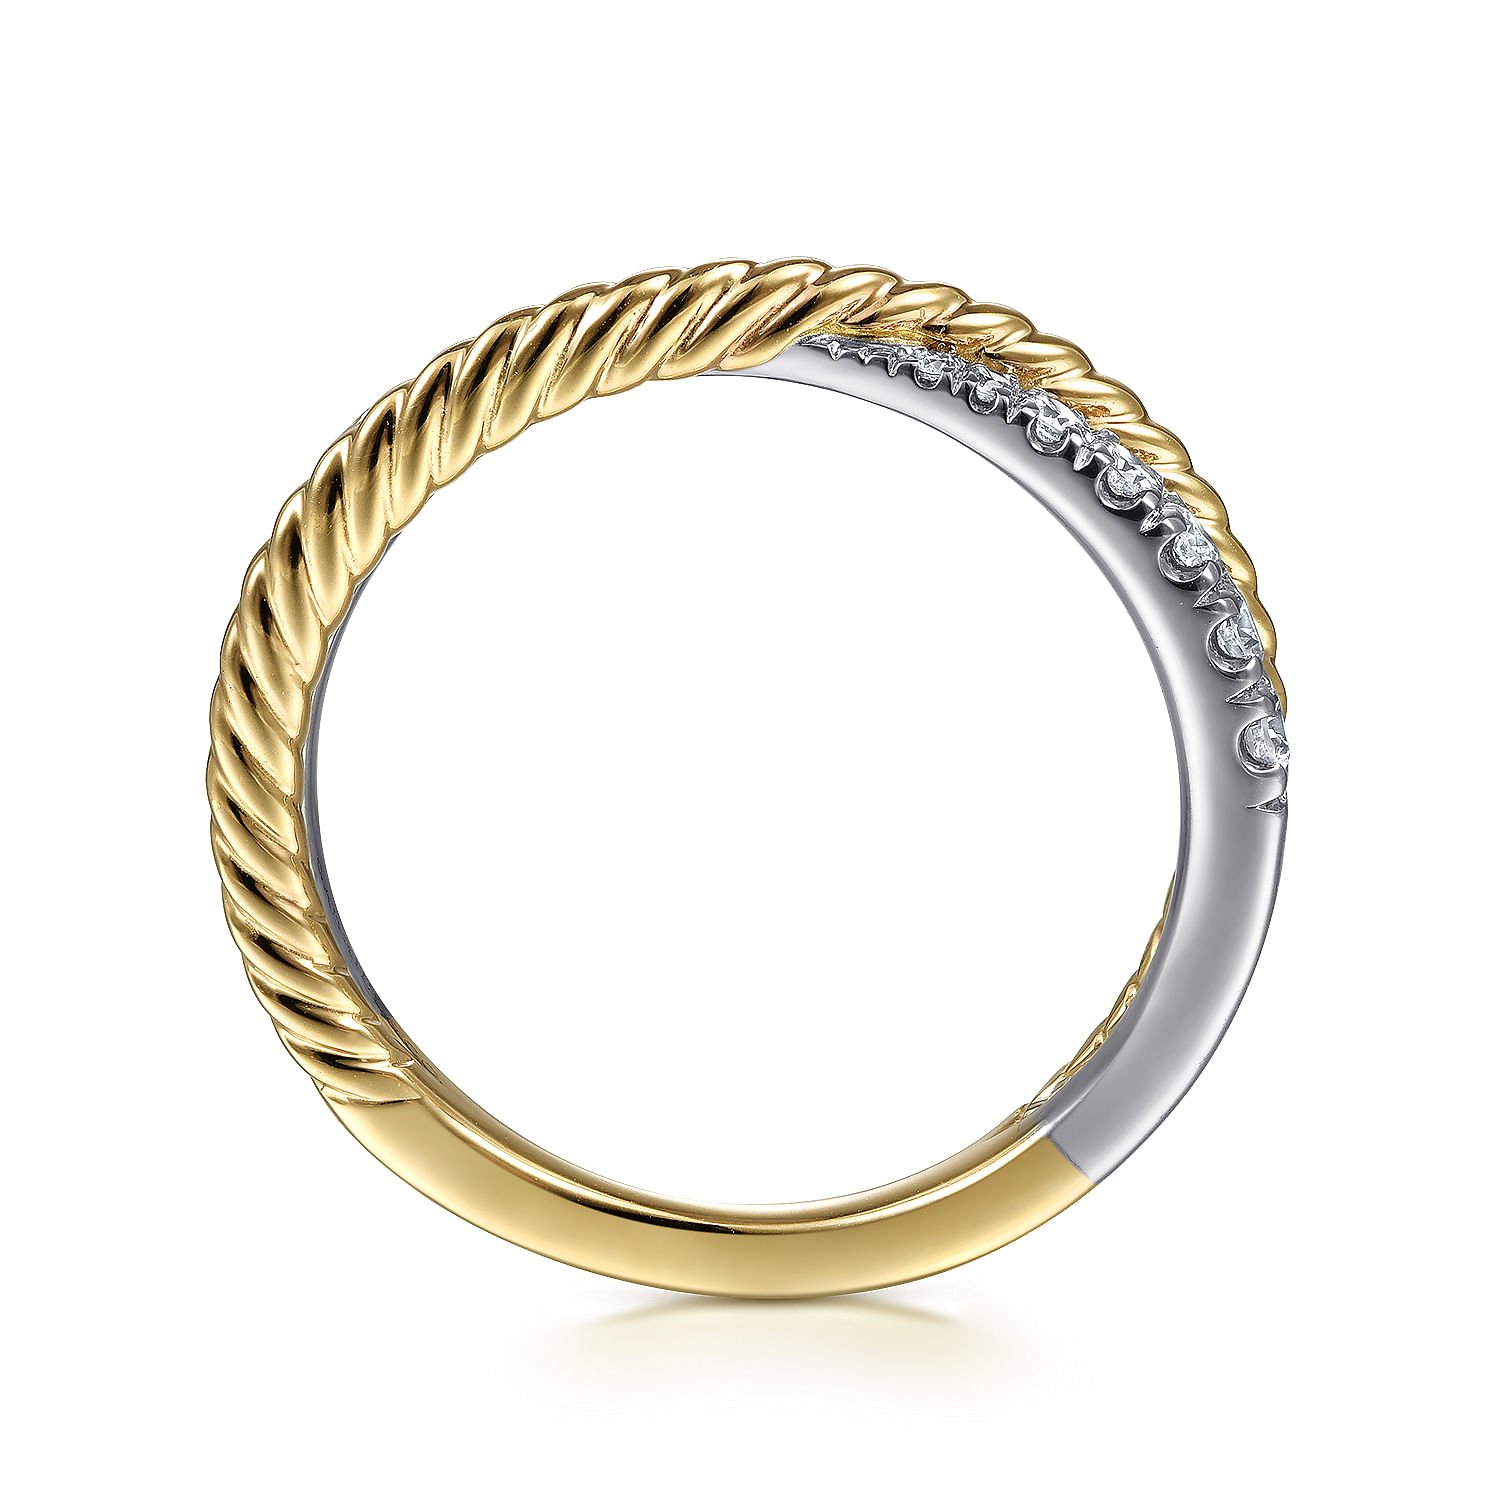 14K White-Yellow Gold Criss Cross Diamond Anniversary Band with Twisted Rope Detail